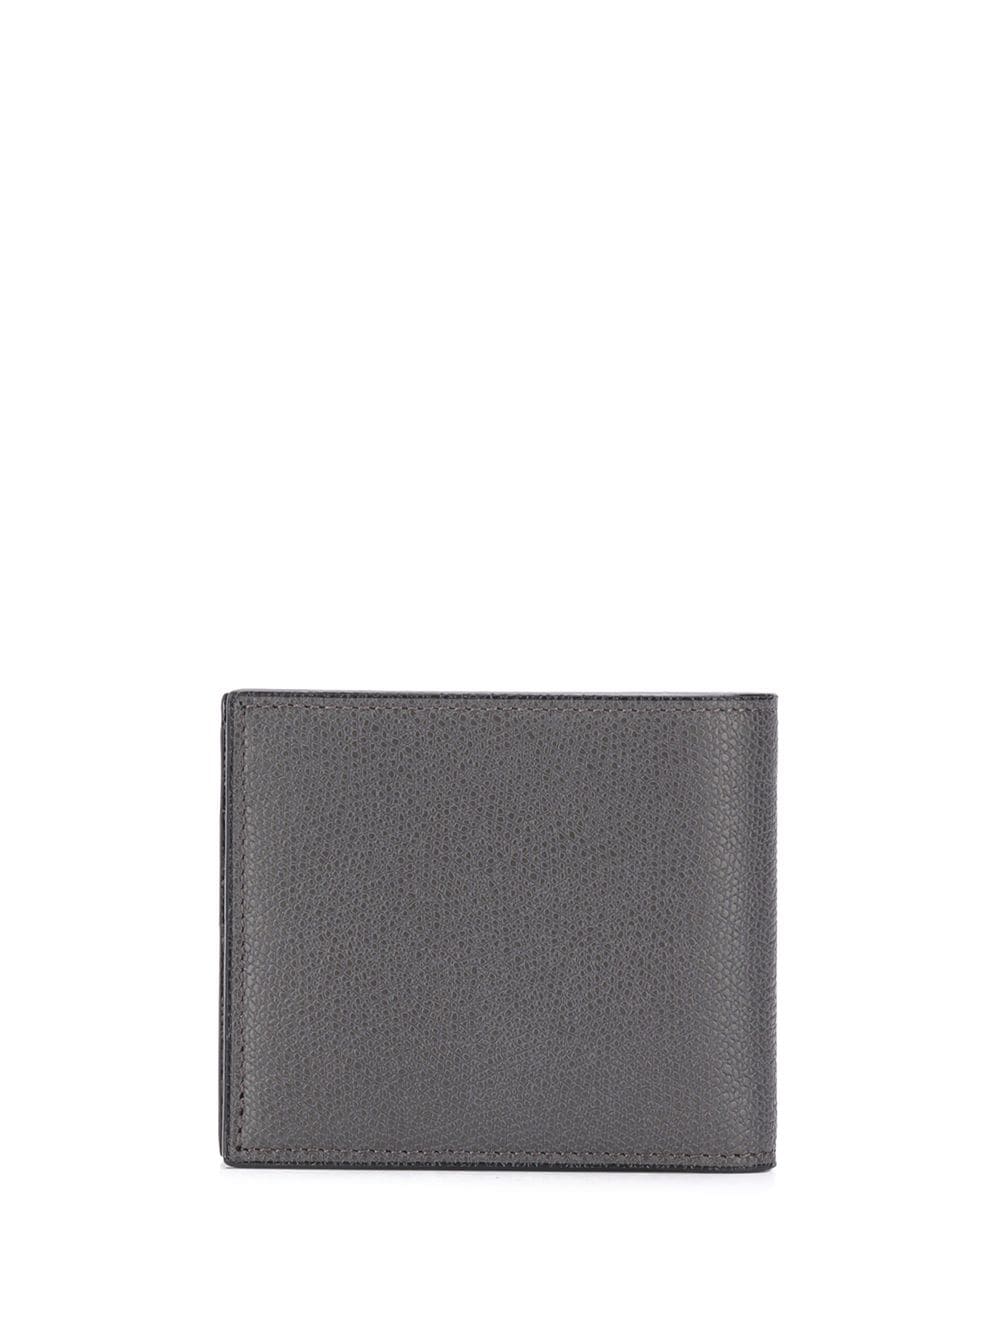 Image 2 of Valextra smooth square wallet